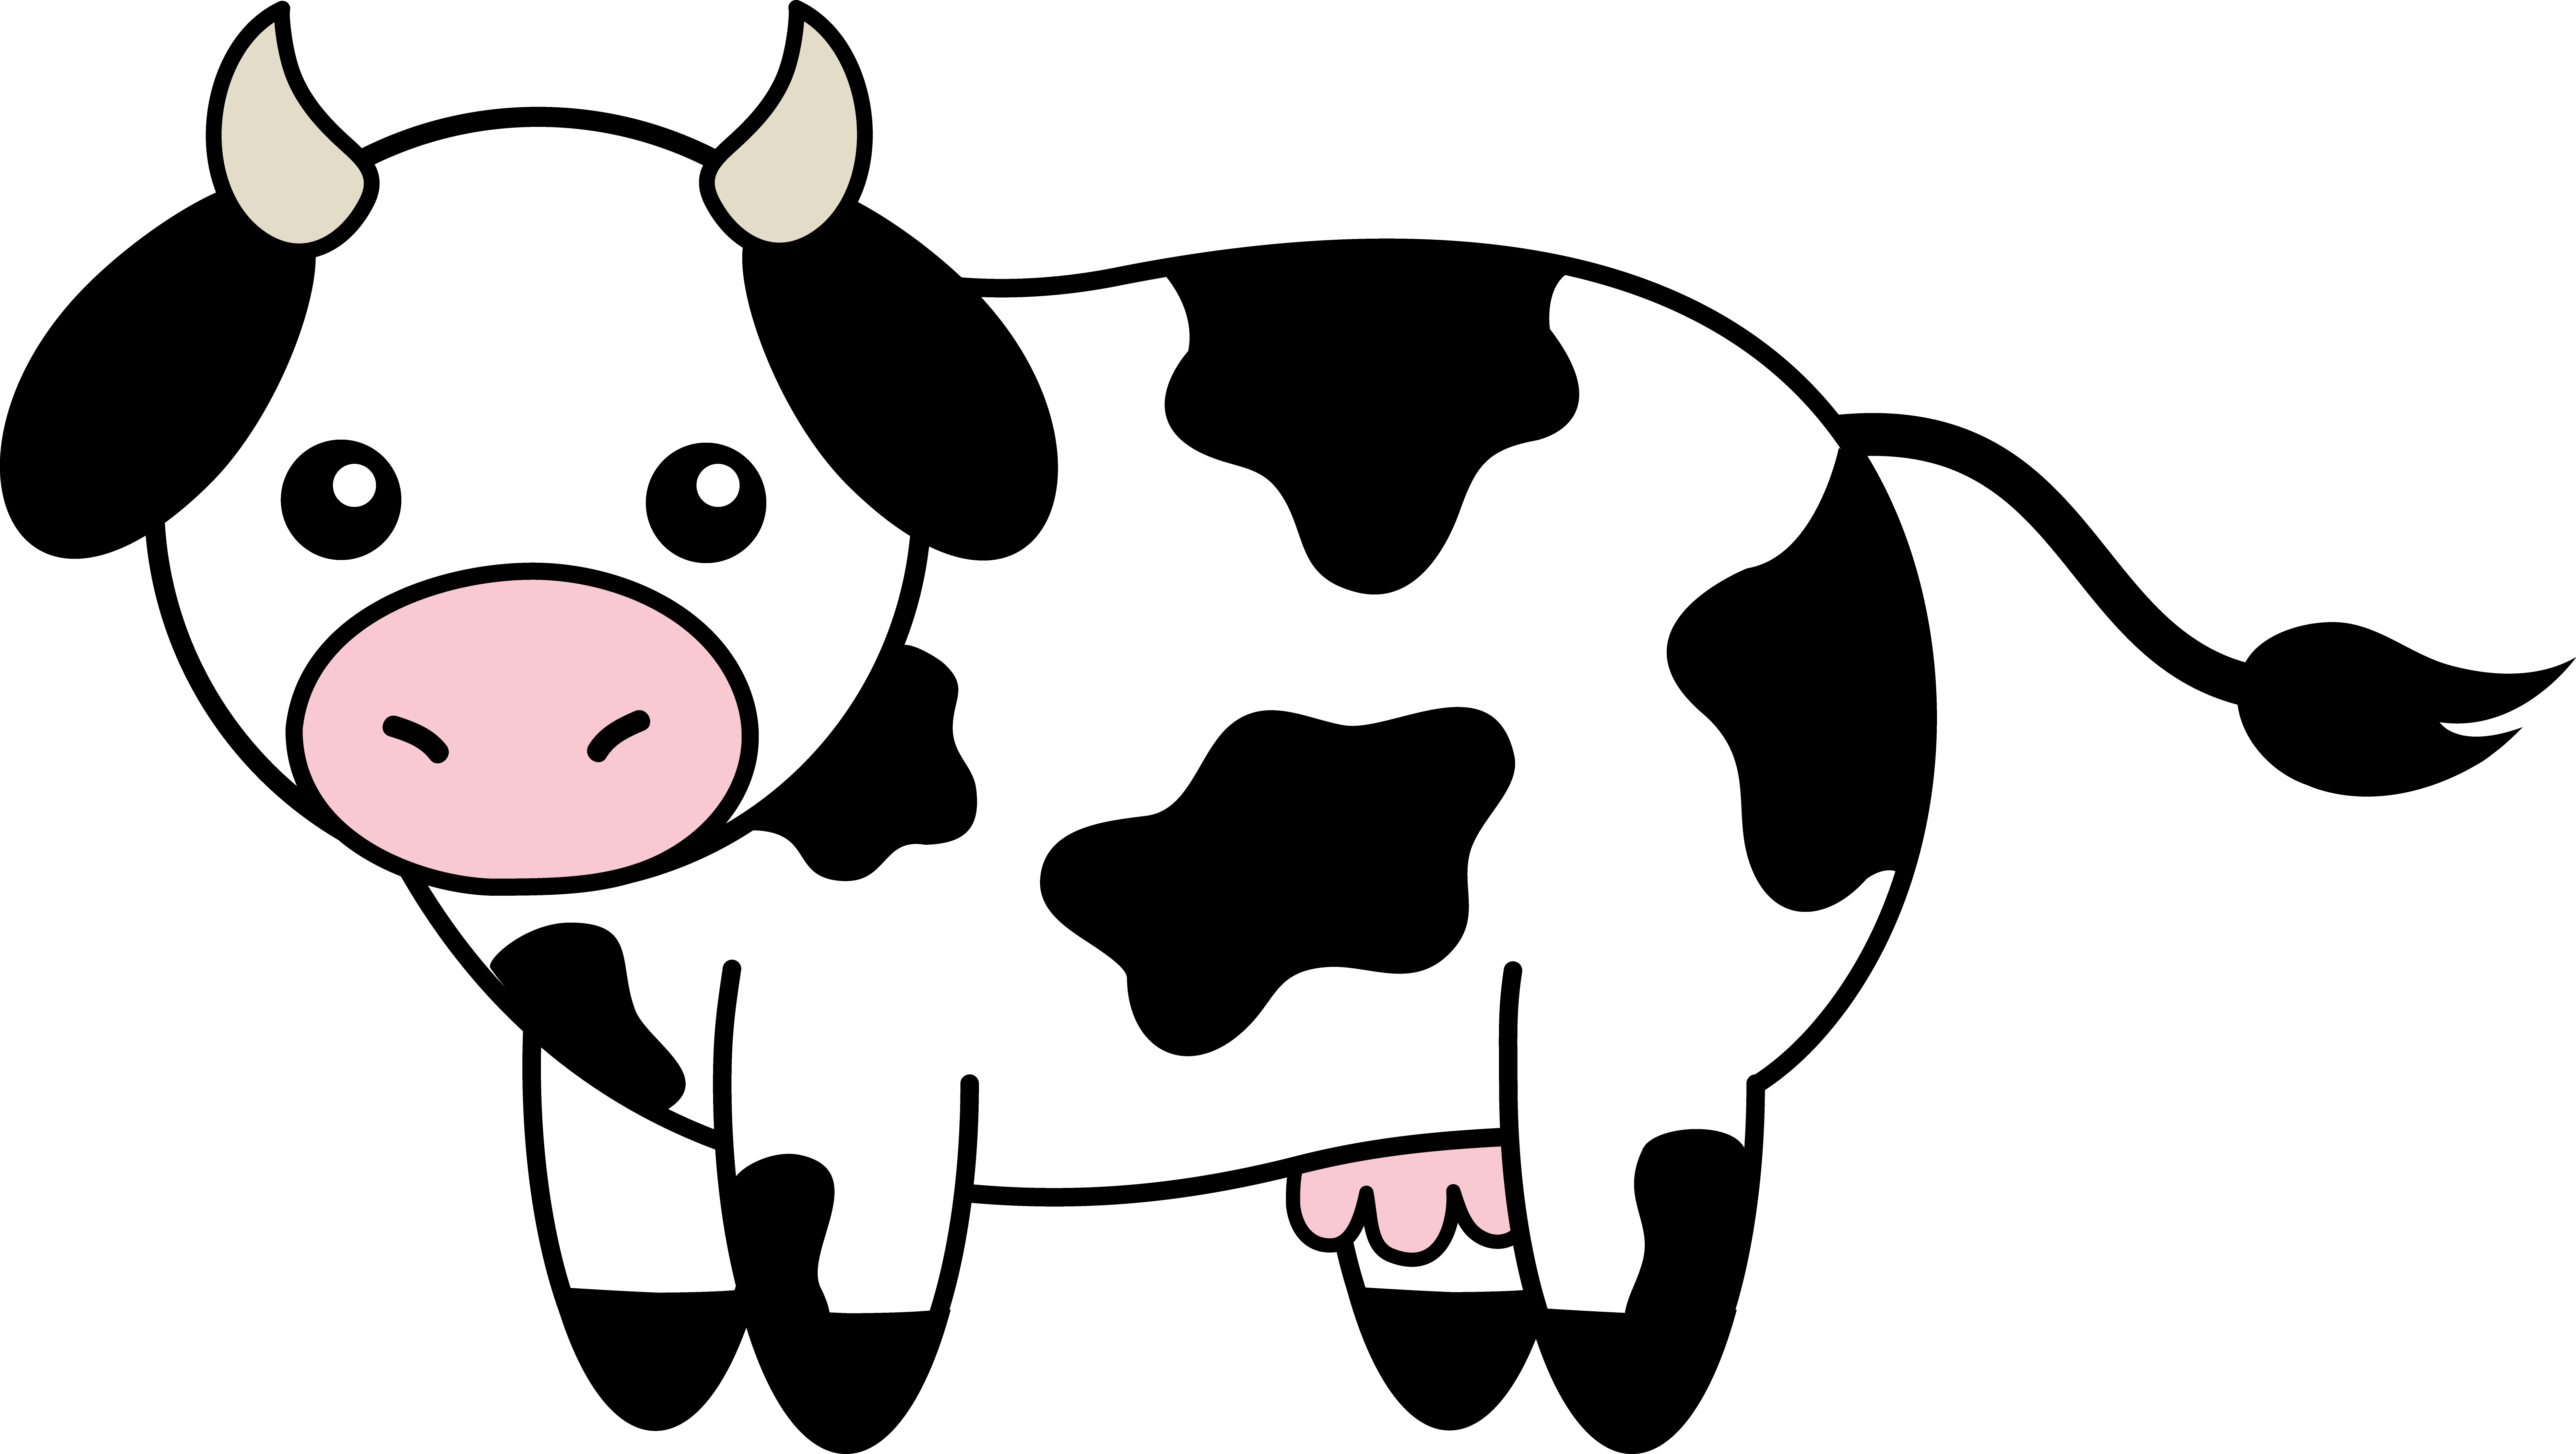 Cattle drive clipart